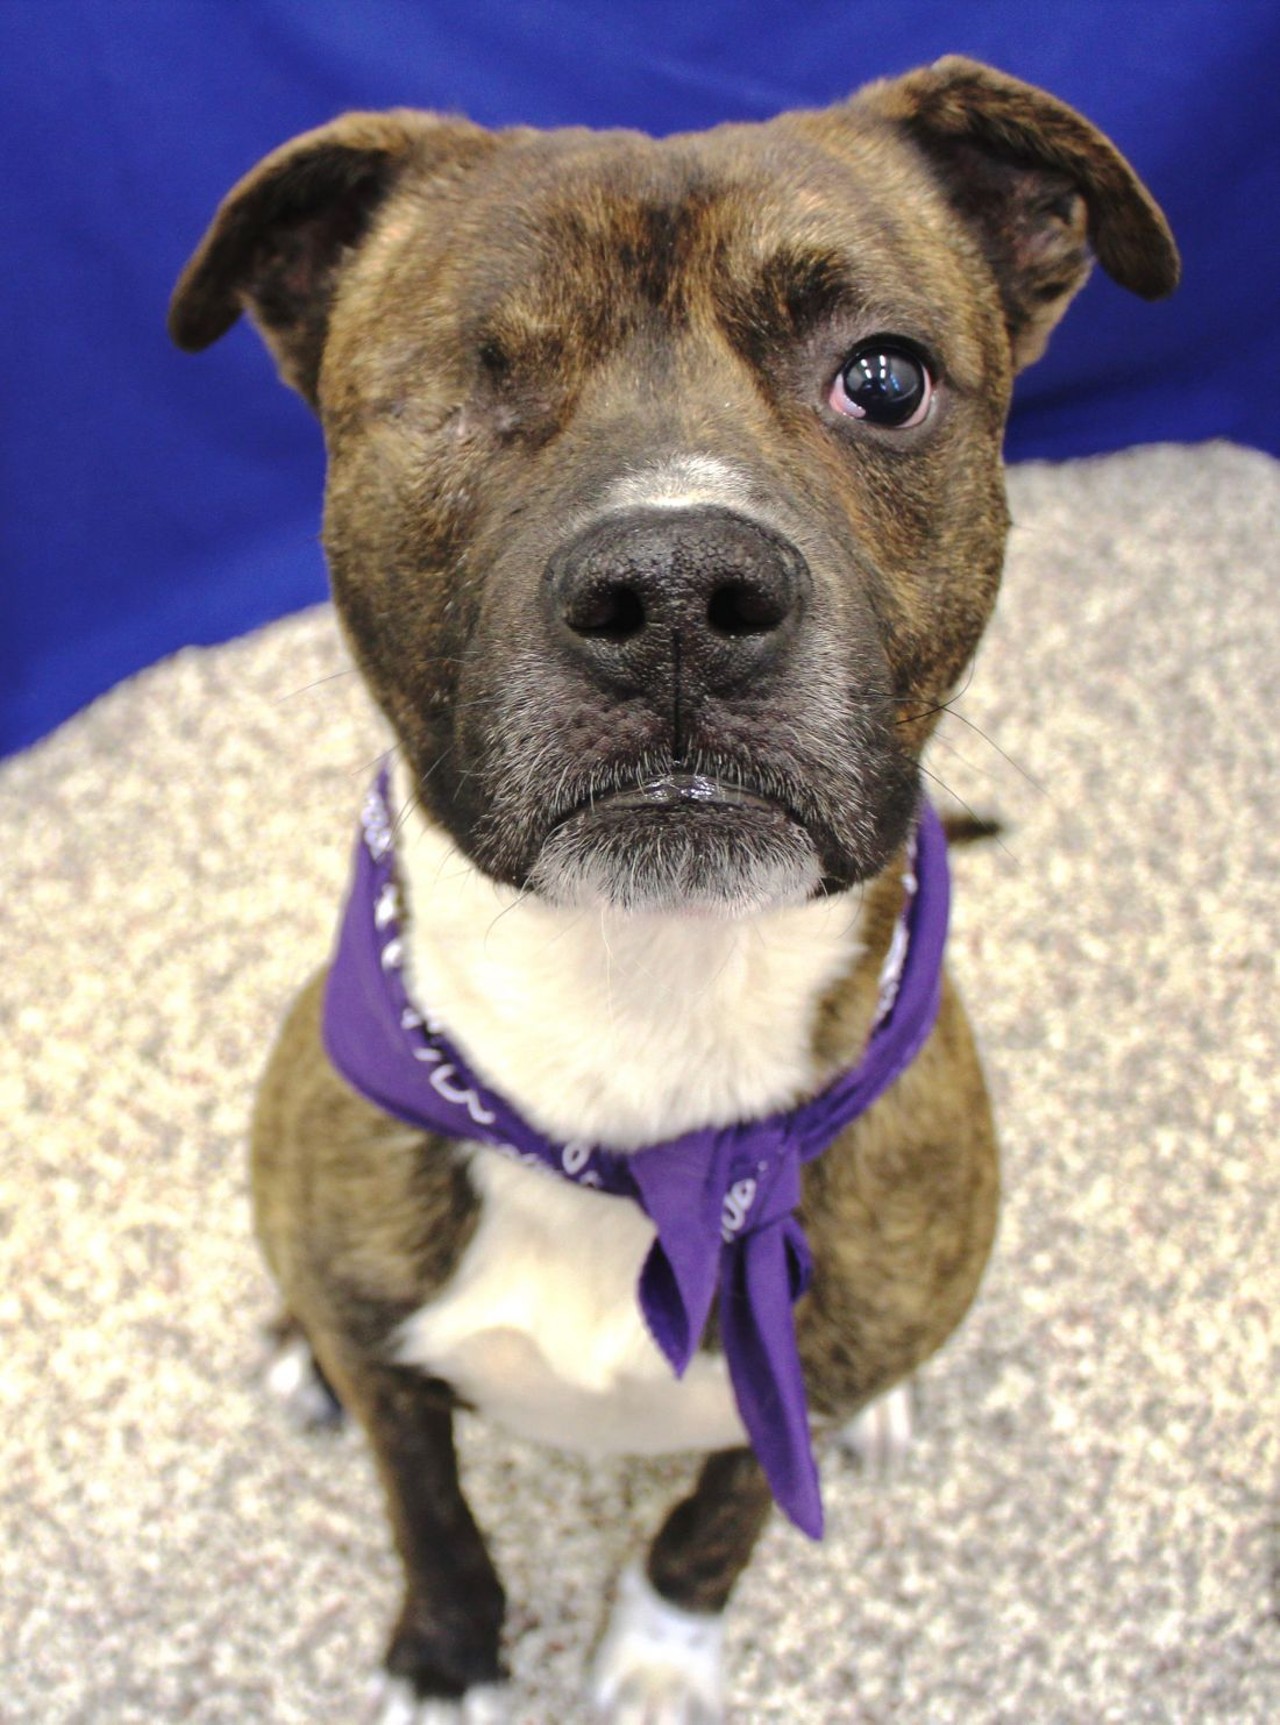 NAME: Jack
GENDER: Male
BREED: Pit Bull Terrier
AGE: 1 year
WEIGHT: 55 pounds
SPECIAL CONSIDERATIONS: Partial blindness
REASON I CAME TO MHS: Homeless and injured in Detroit
LOCATION: Petco of Sterling Heights
ID NUMBER: 864456
DETAILS: Click here